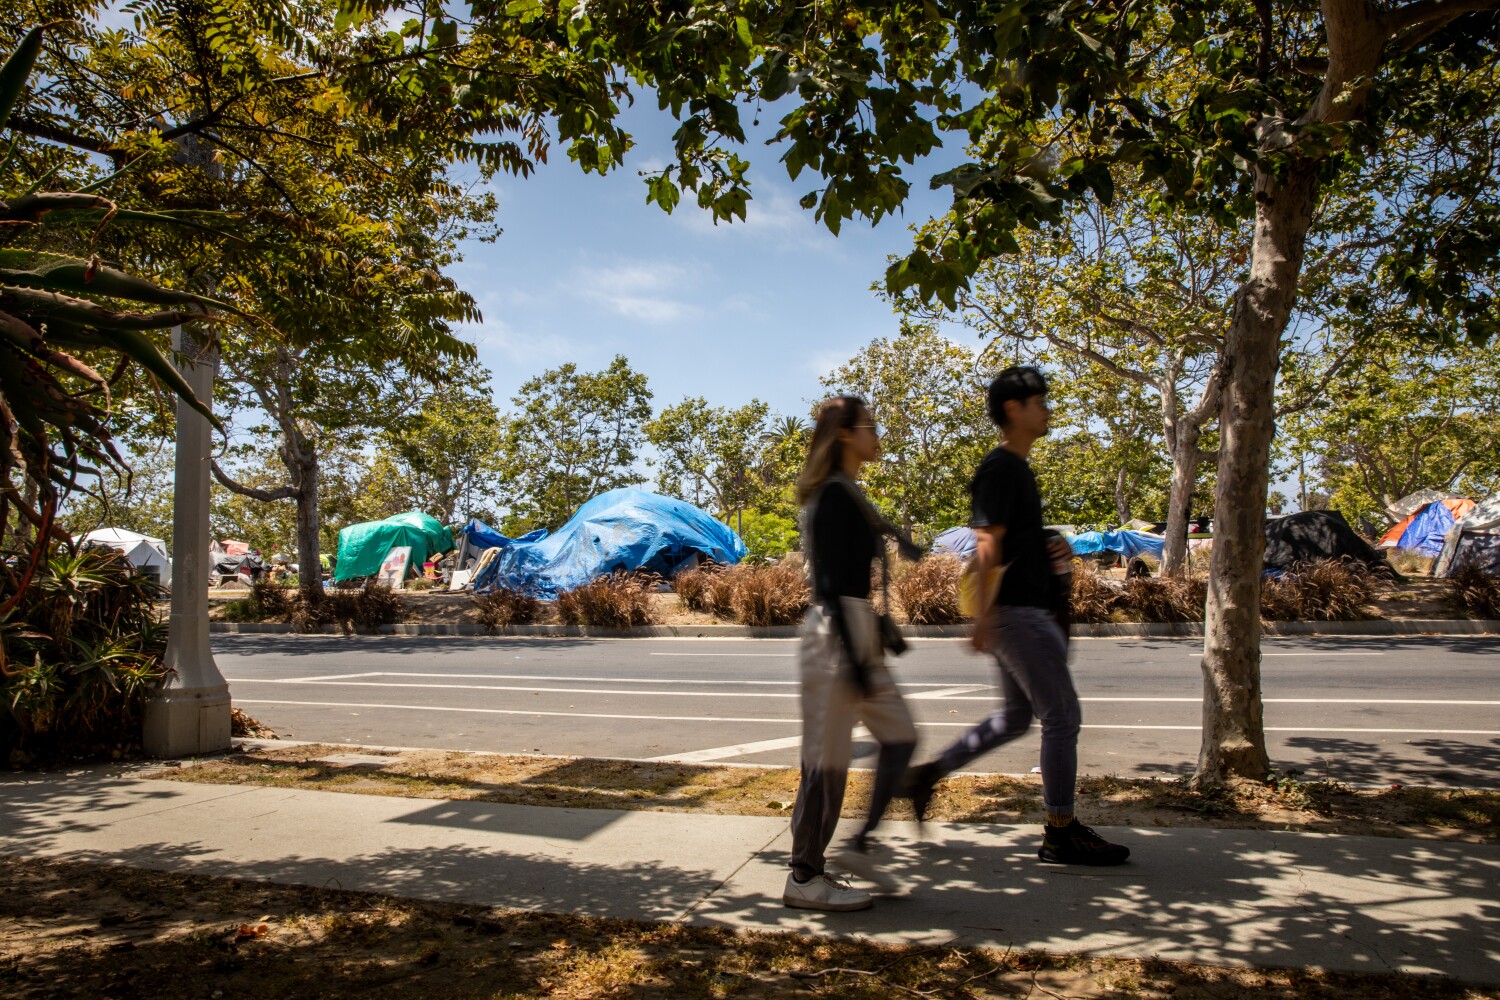 L.A. wants to ban encampments near every school, daycare